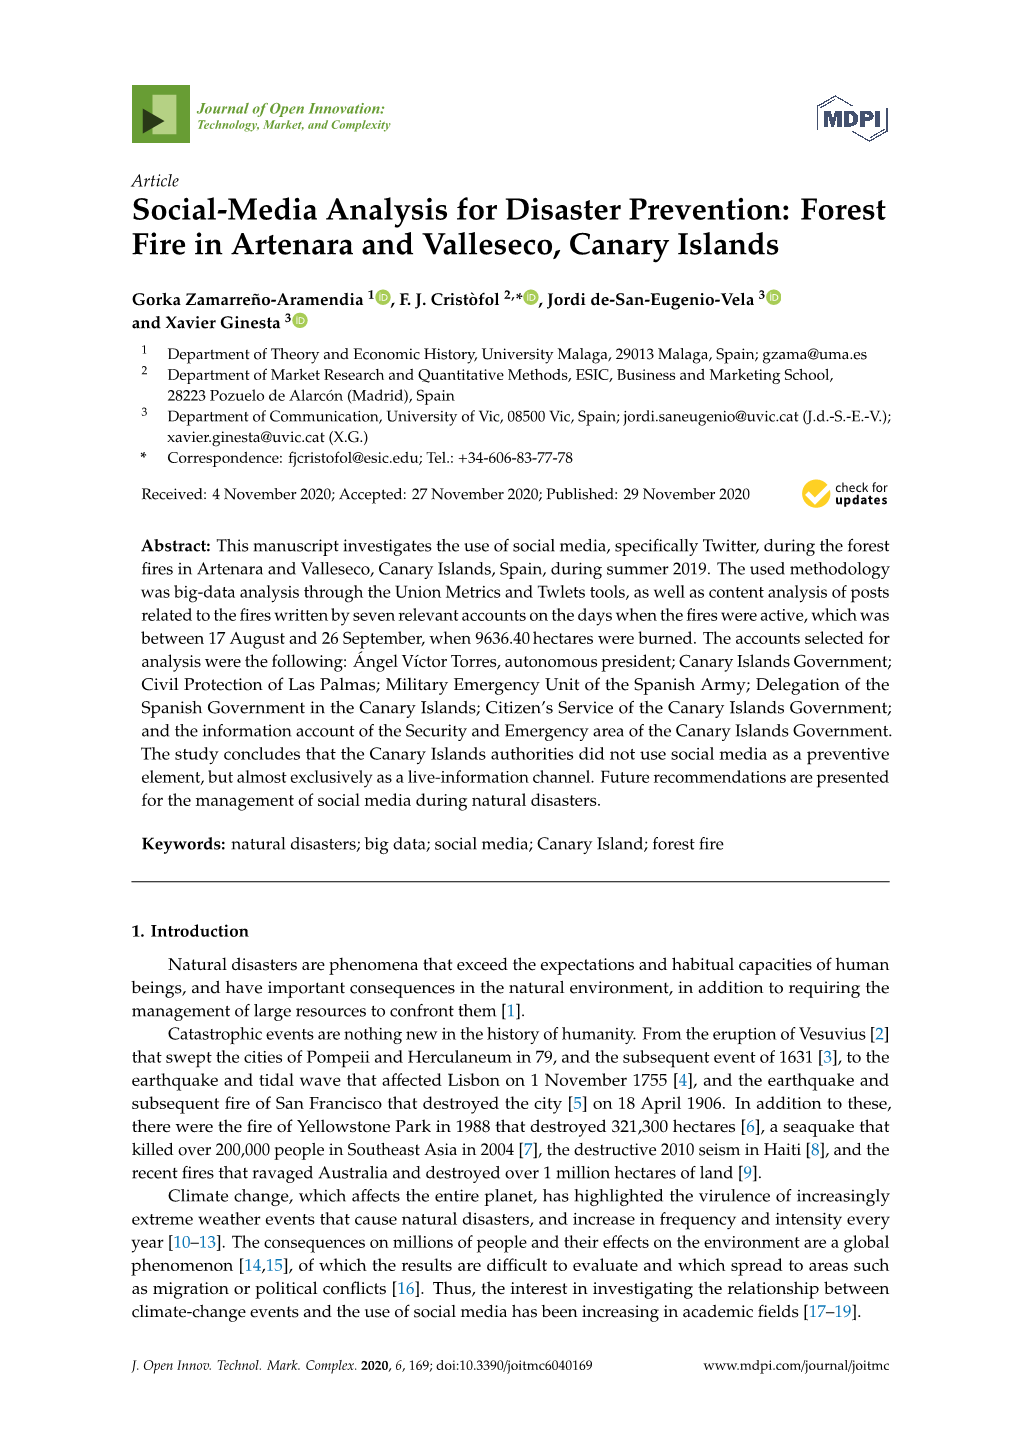 Social-Media Analysis for Disaster Prevention: Forest Fire in Artenara and Valleseco, Canary Islands